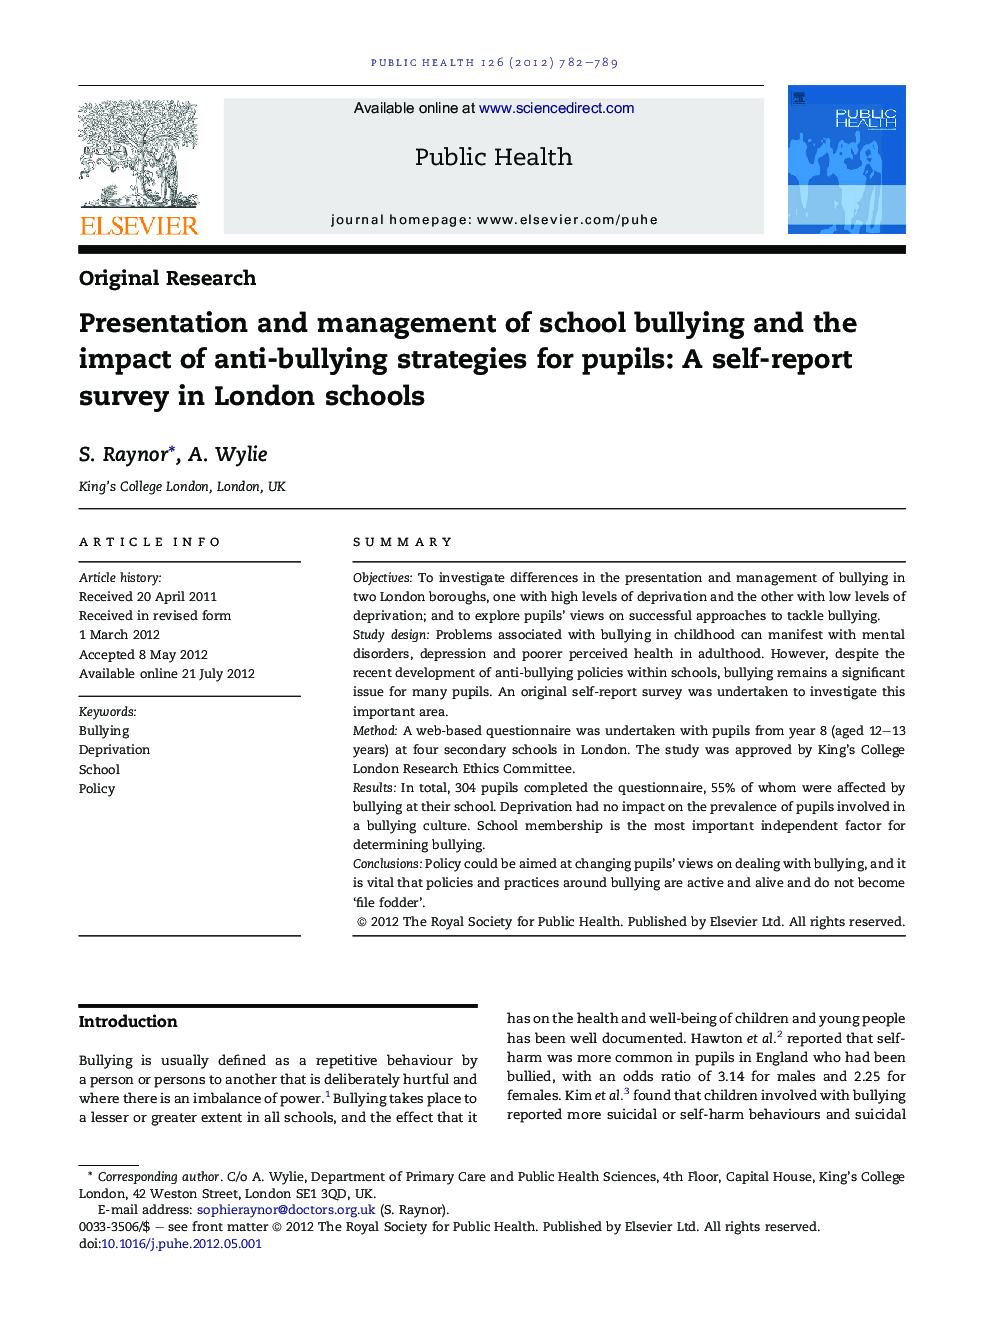 Presentation and management of school bullying and the impact of anti-bullying strategies for pupils: A self-report survey in London schools